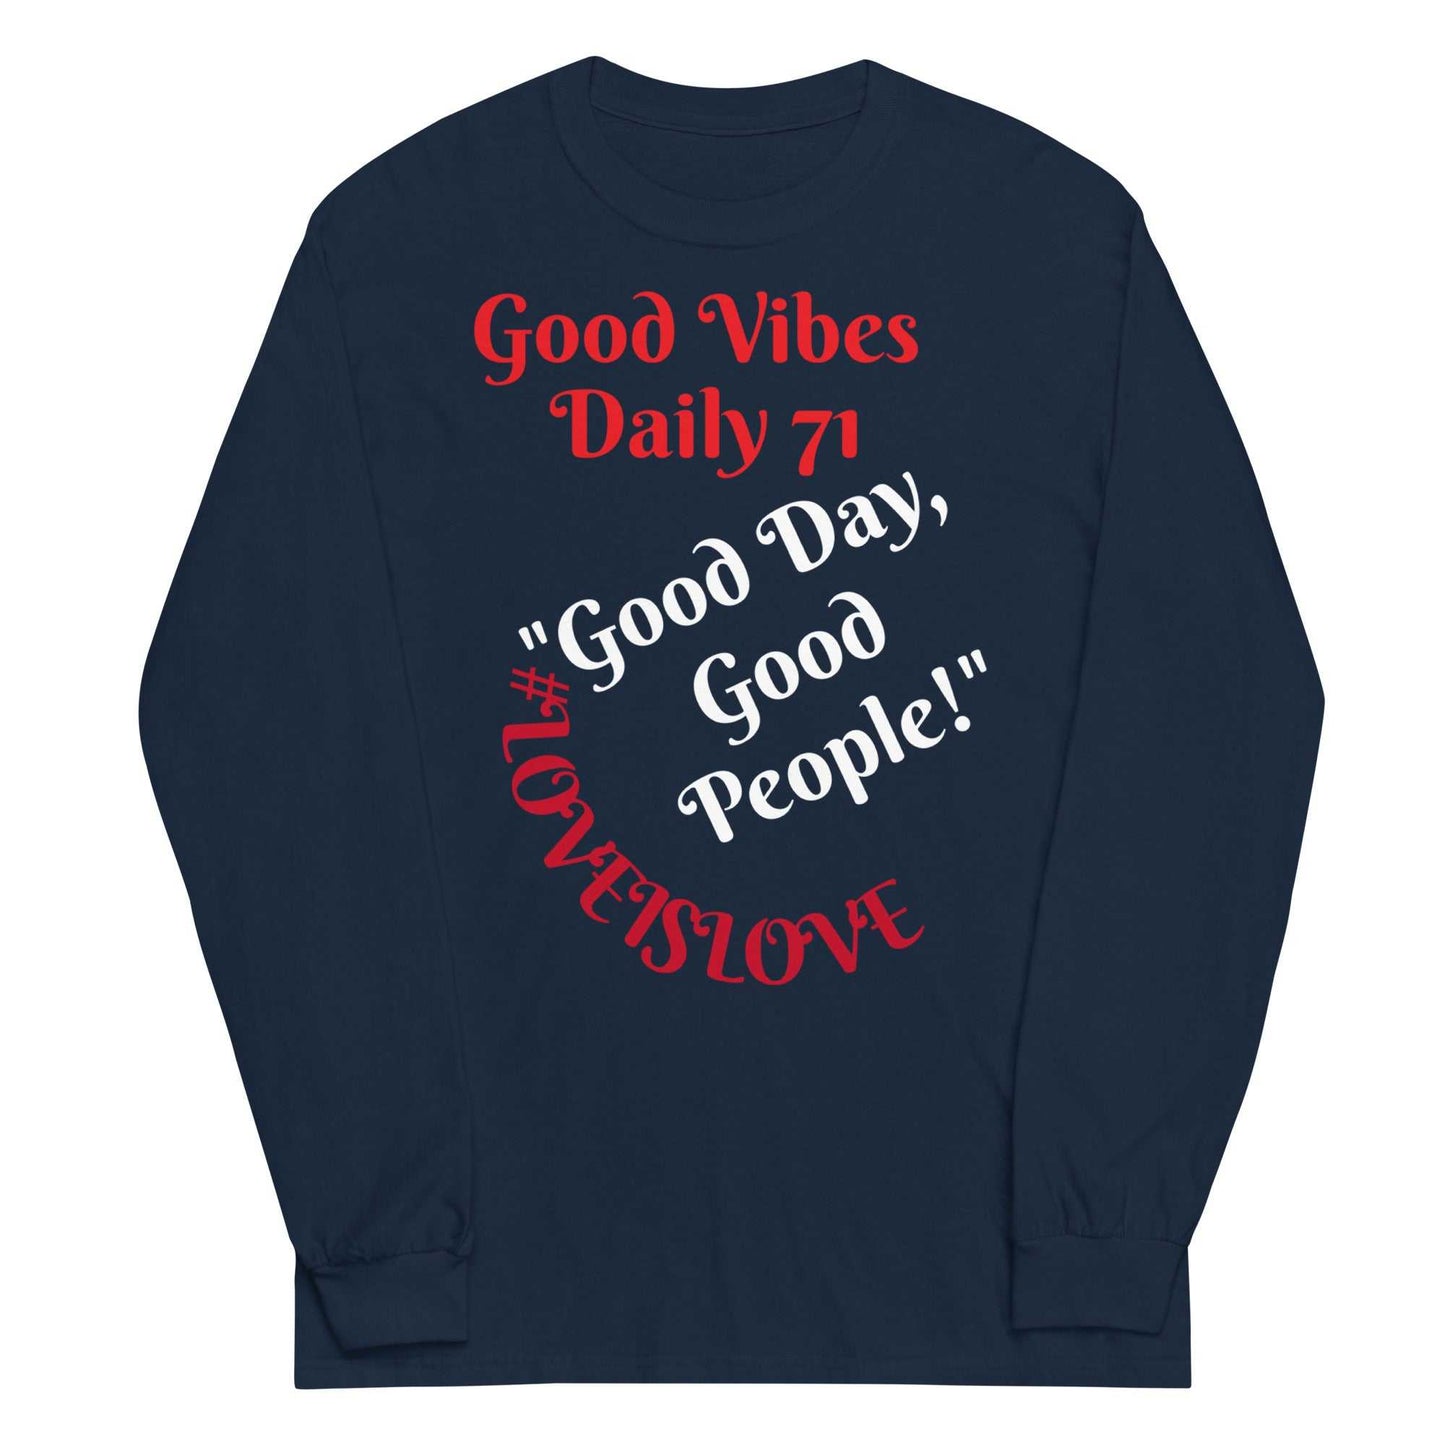 Good Vibes Men’s Long Sleeve Shirt Long Sleeve T-shirts and Joggers Good Vibes Daily Lab 44